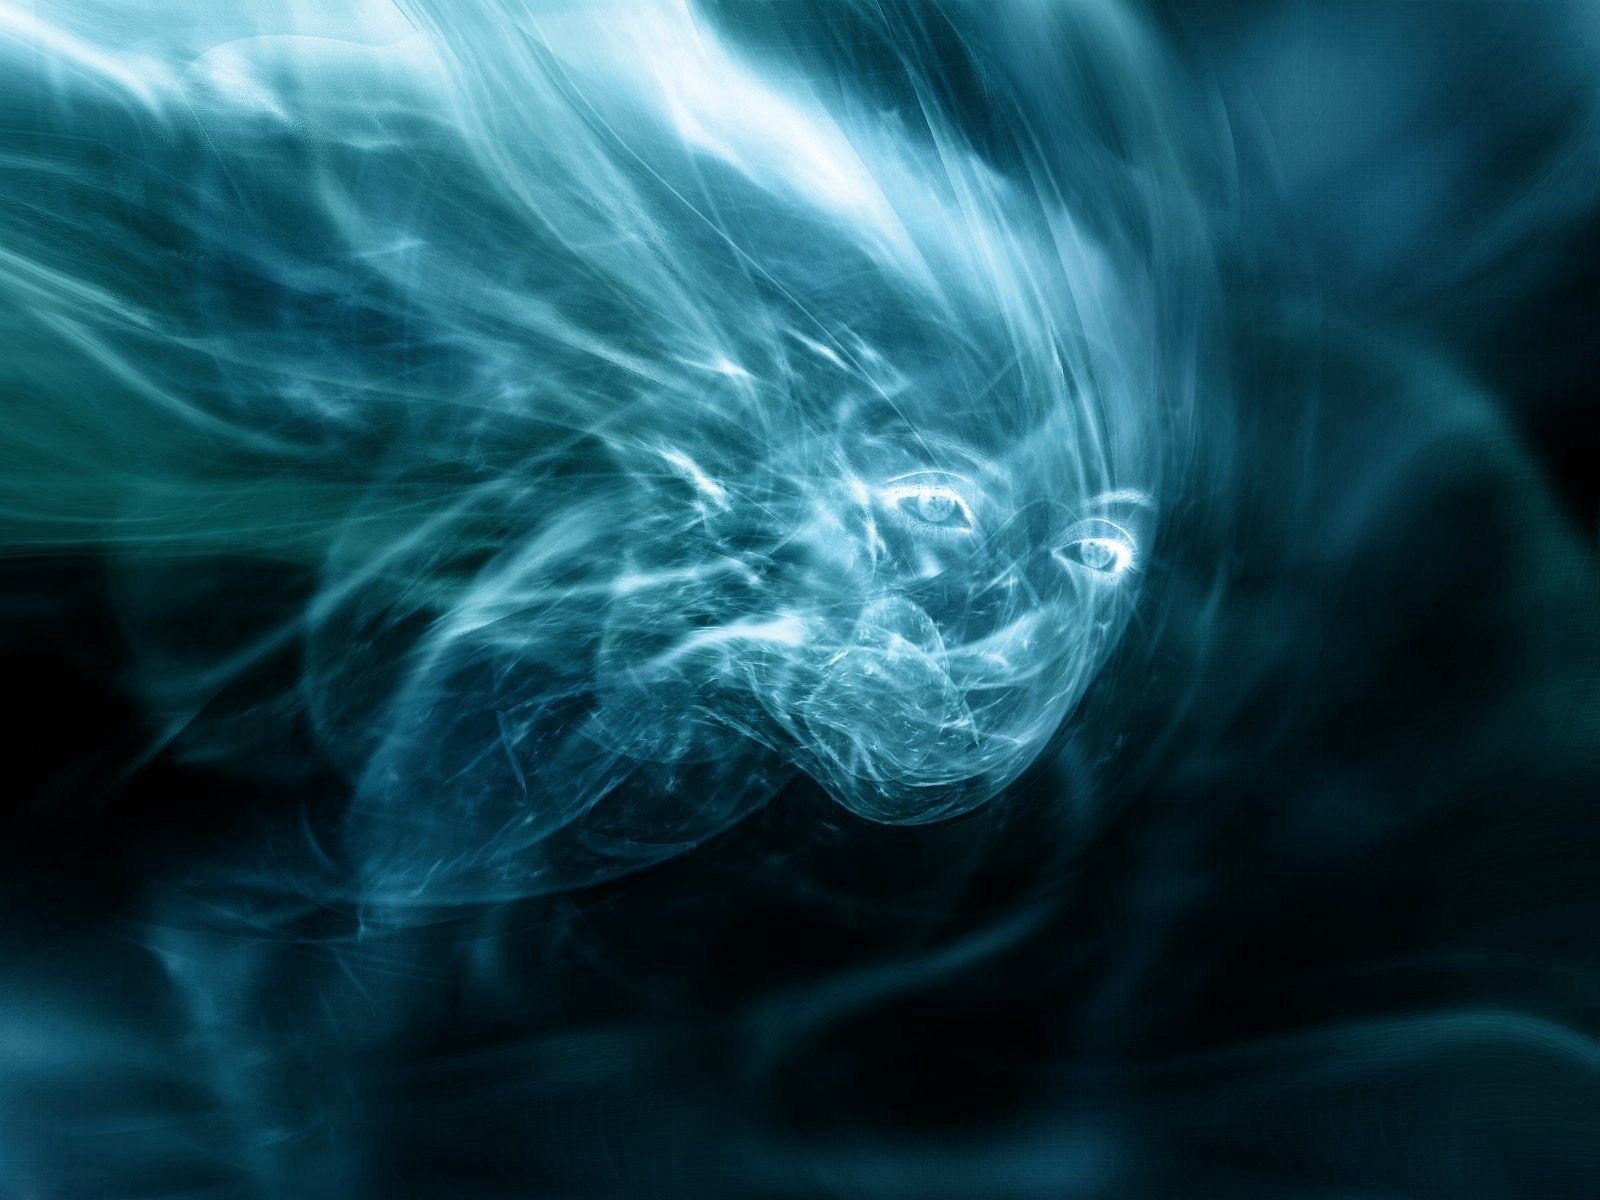 imagination, abstract, smoke, form, fear, face, image